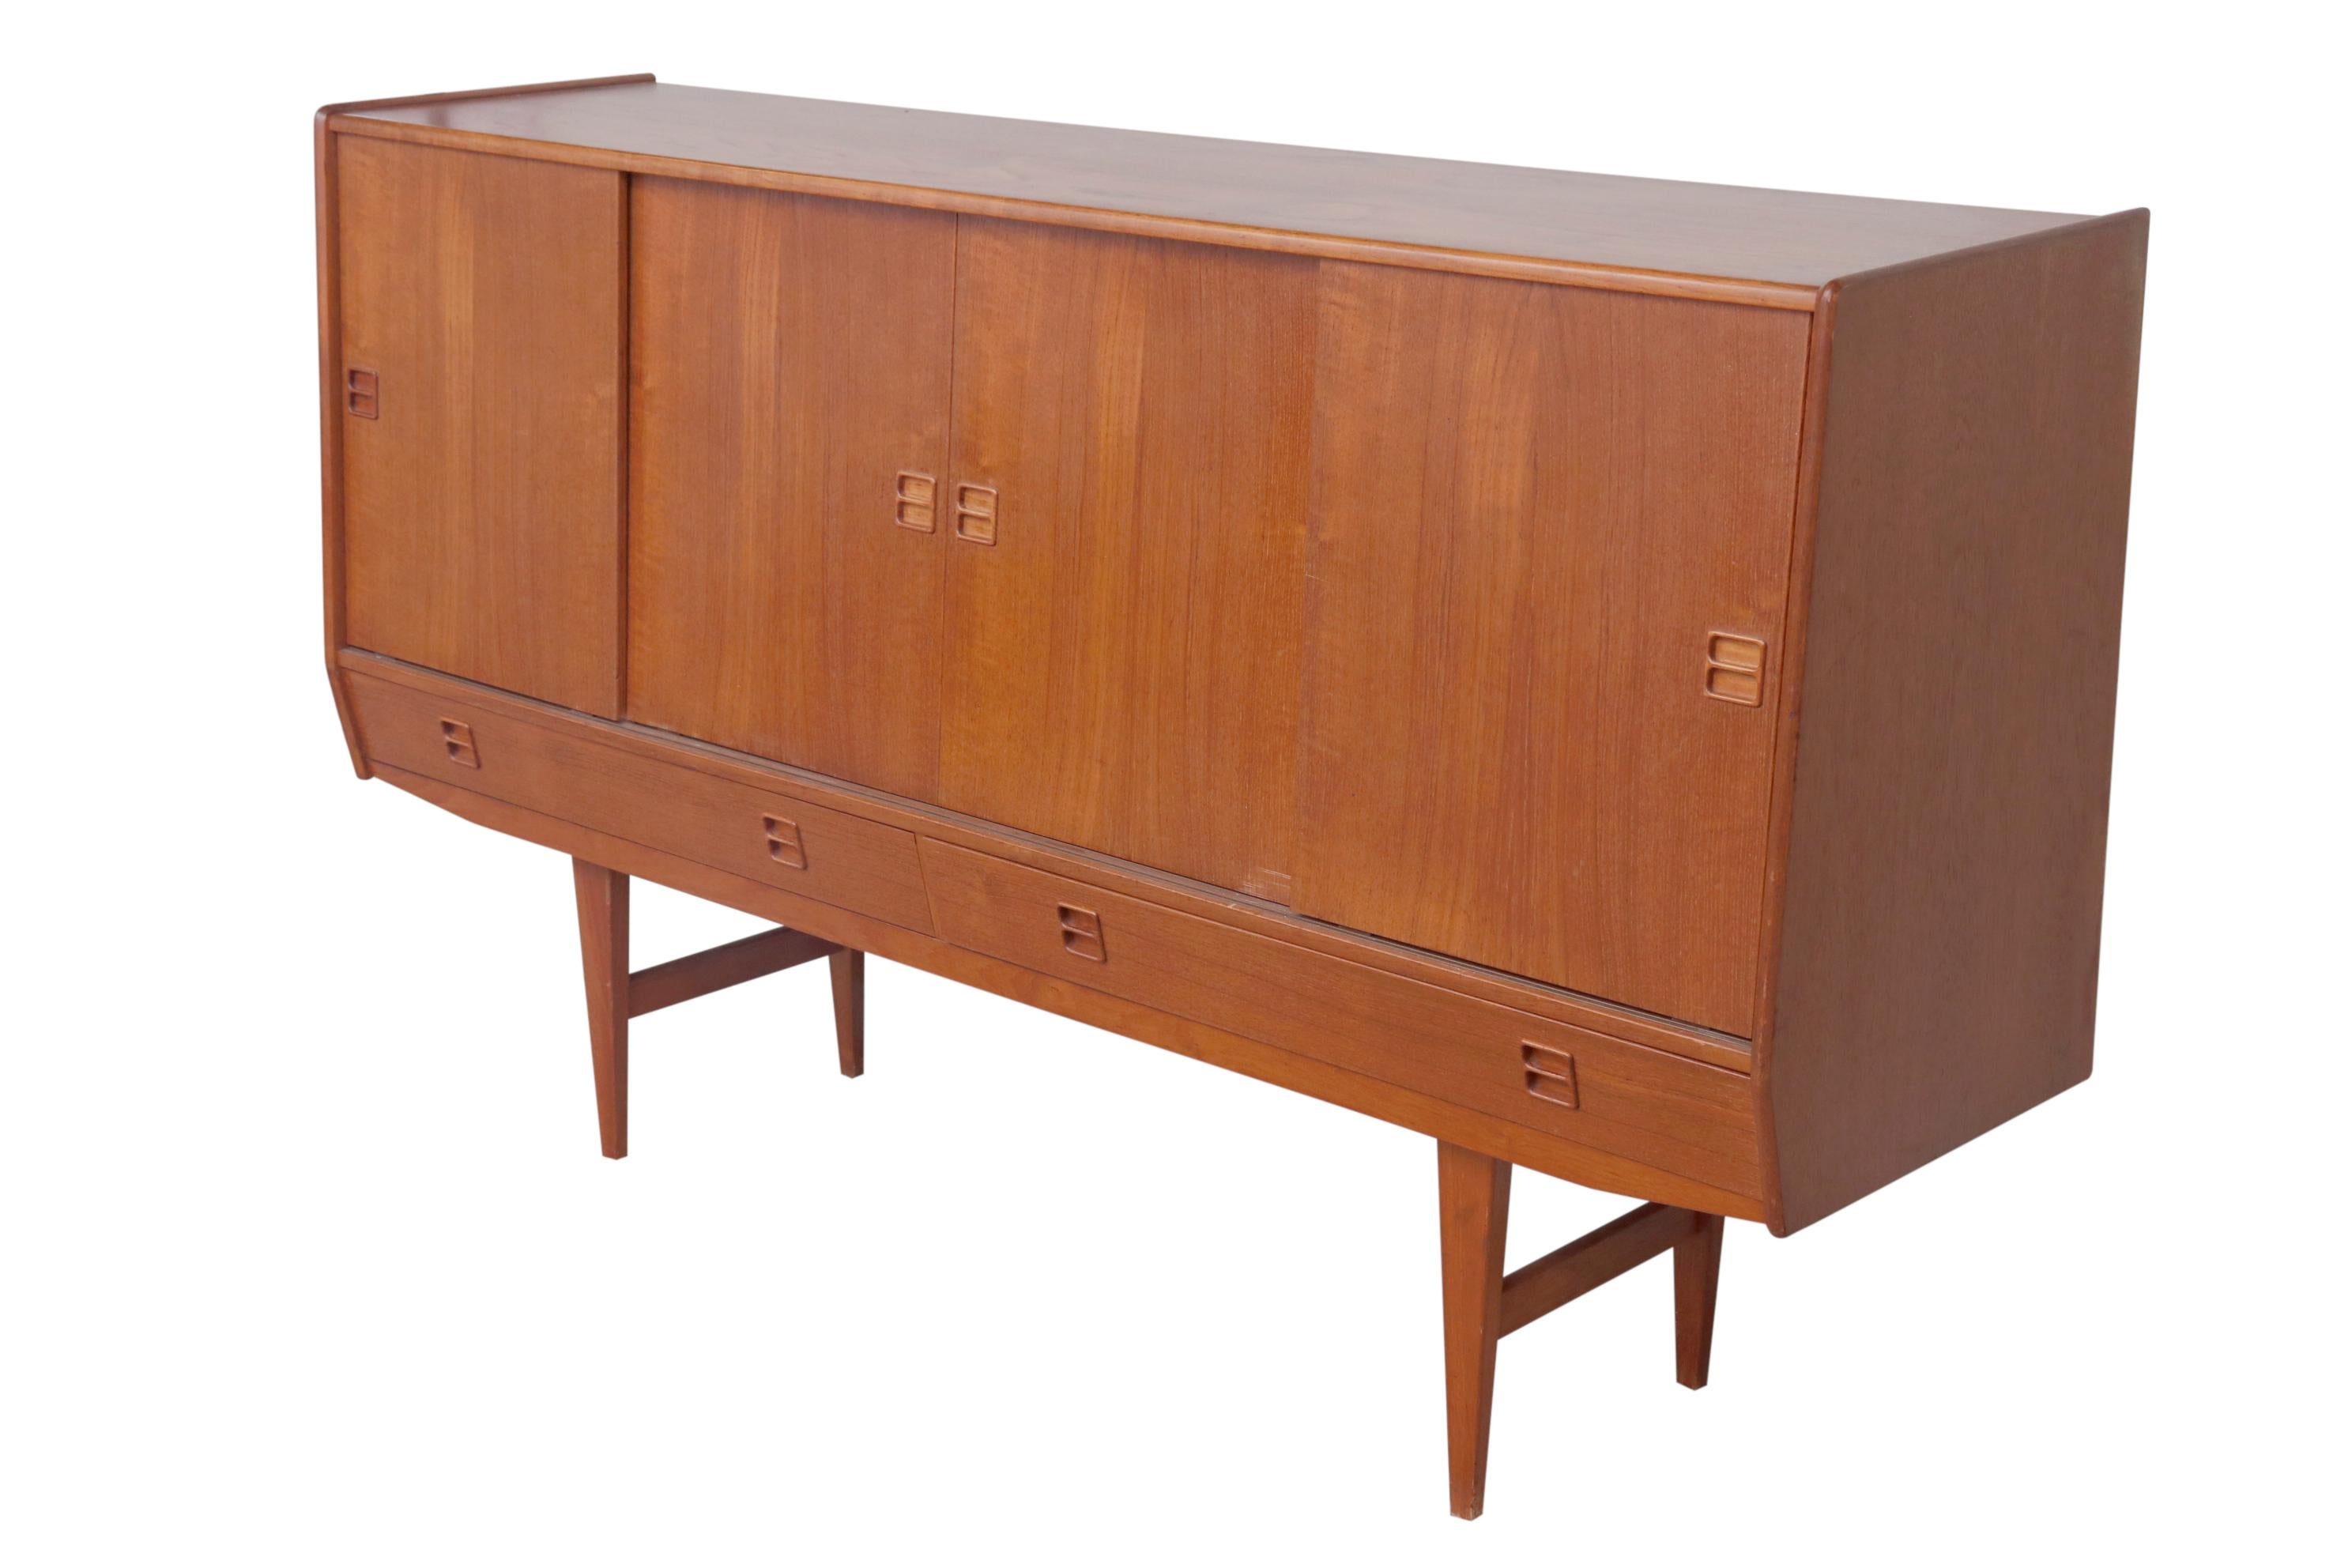 A large teak credenza in the Danish taste. Height measures: 41 inches sliding doors reveal considerable storage. Wonderful color and function.